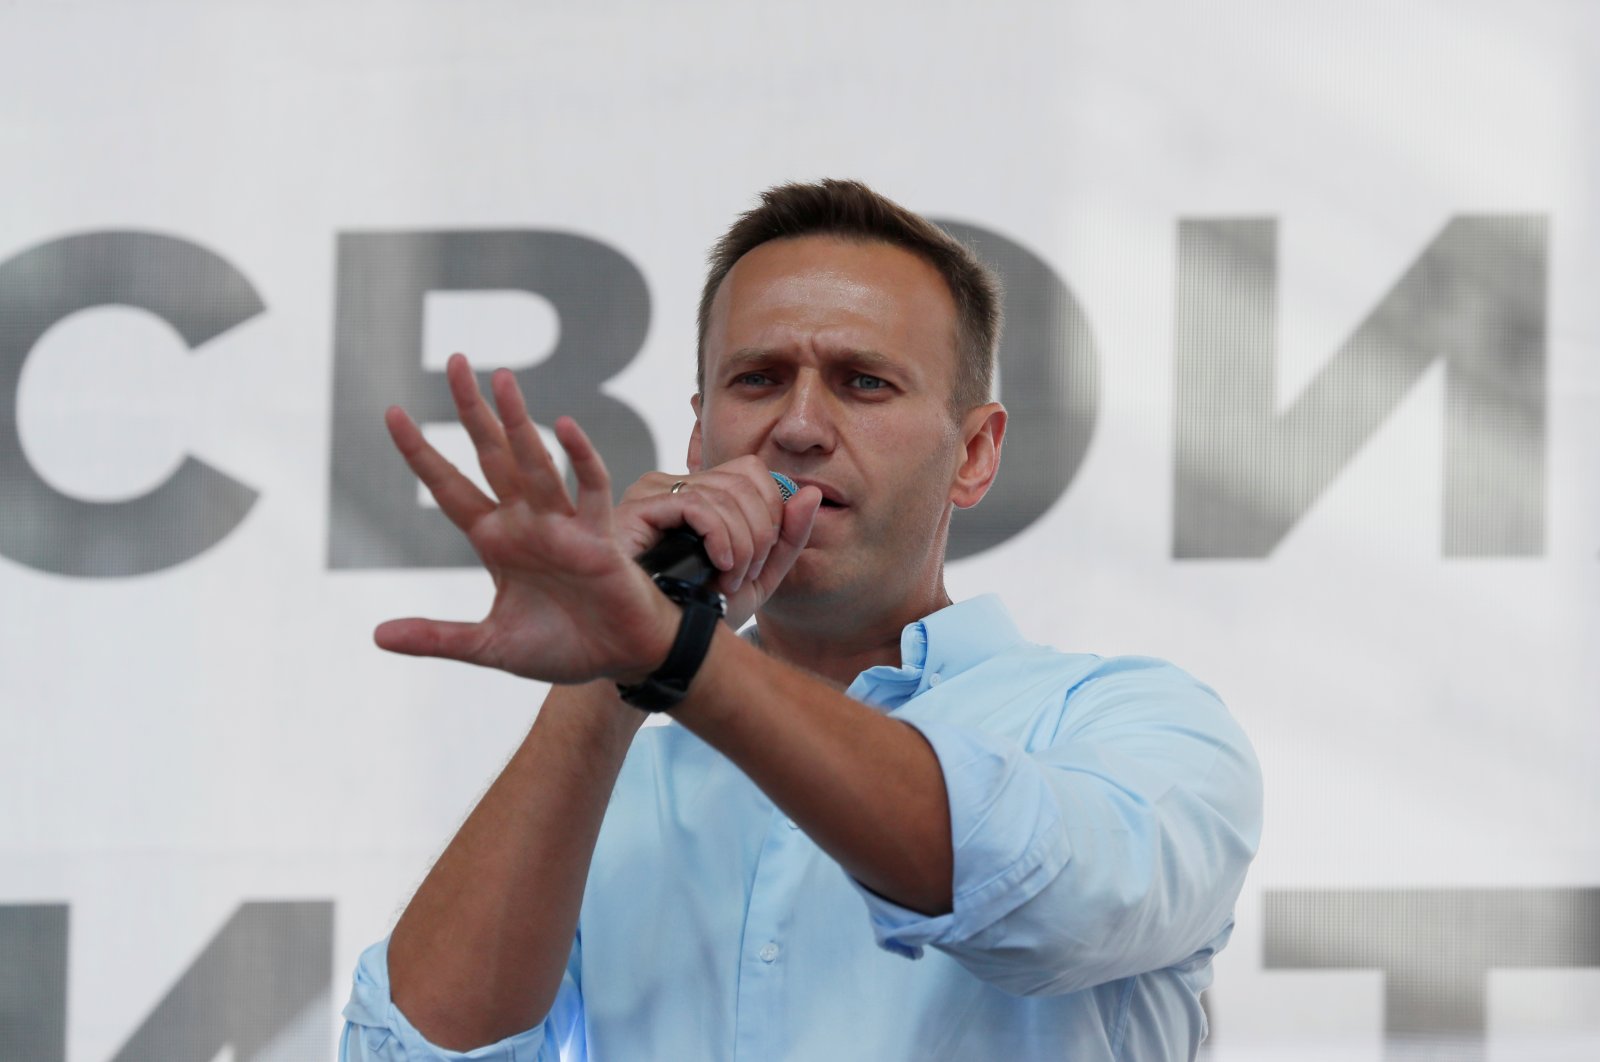 Russian opposition leader Alexei Navalny addresses demonstrators during a rally in support of independent candidates for elections to Moscow City Duma, the capital's regional parliament, in Moscow, Russia, July 20, 2019. (Reuters Photo)